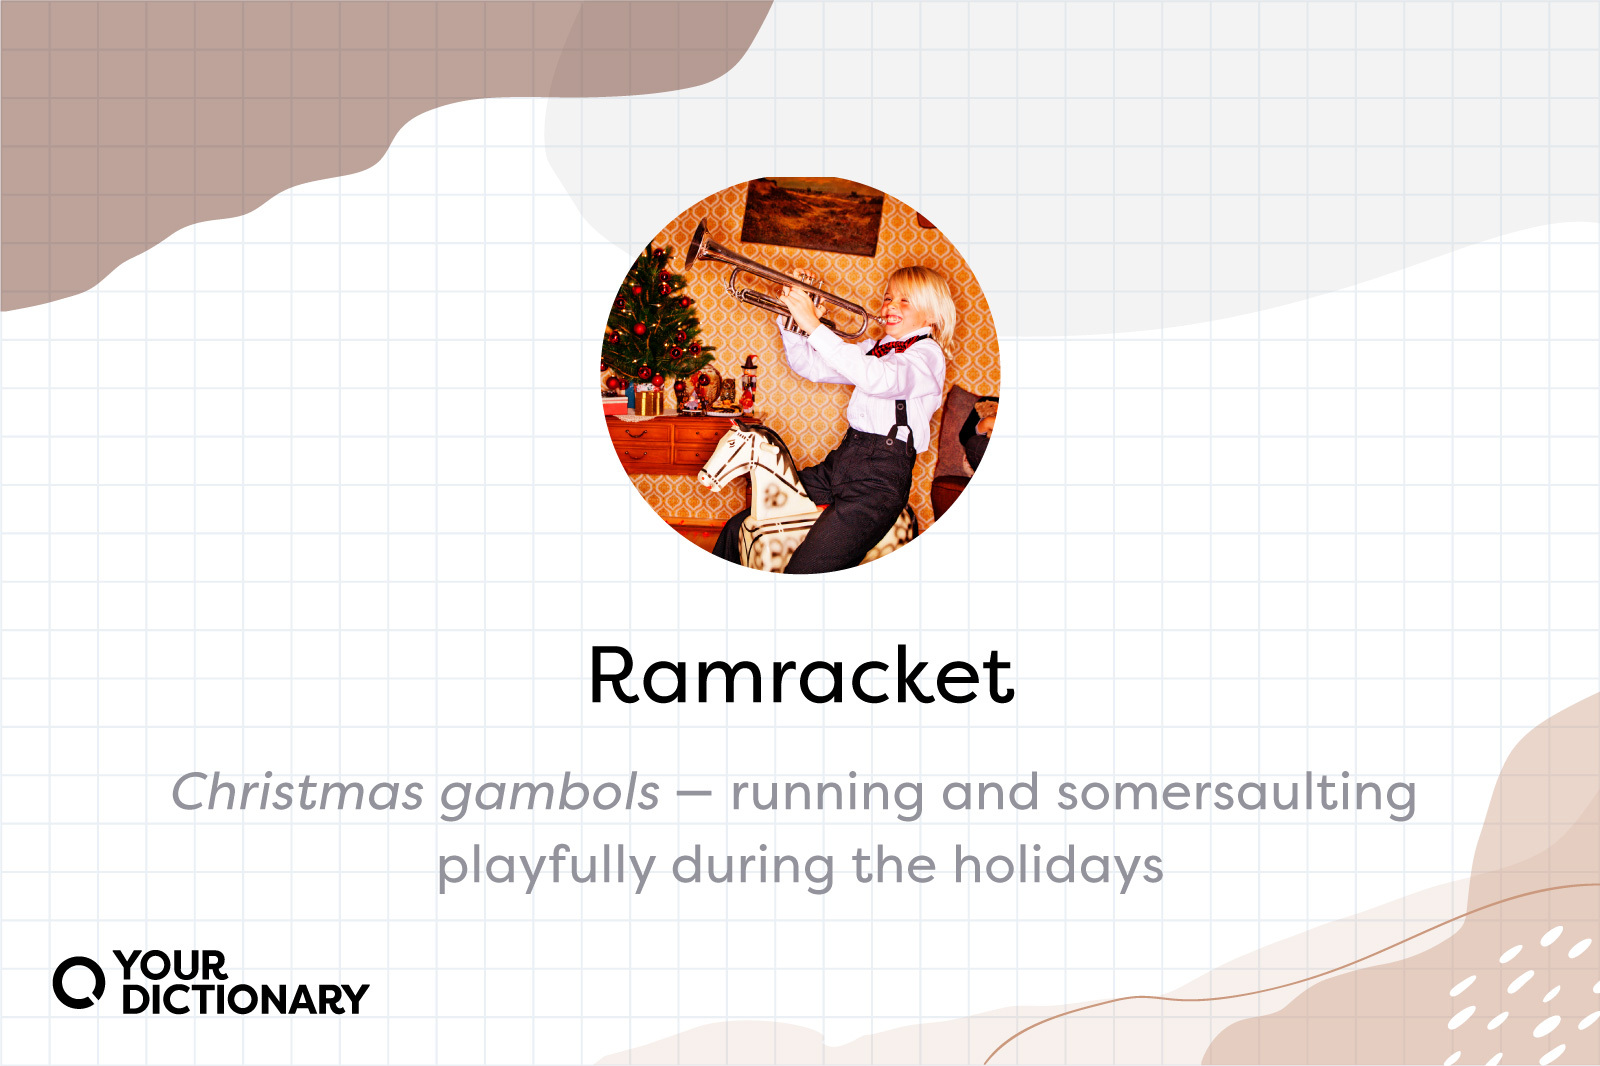 Boys with Christmas presents and Ramracket definition